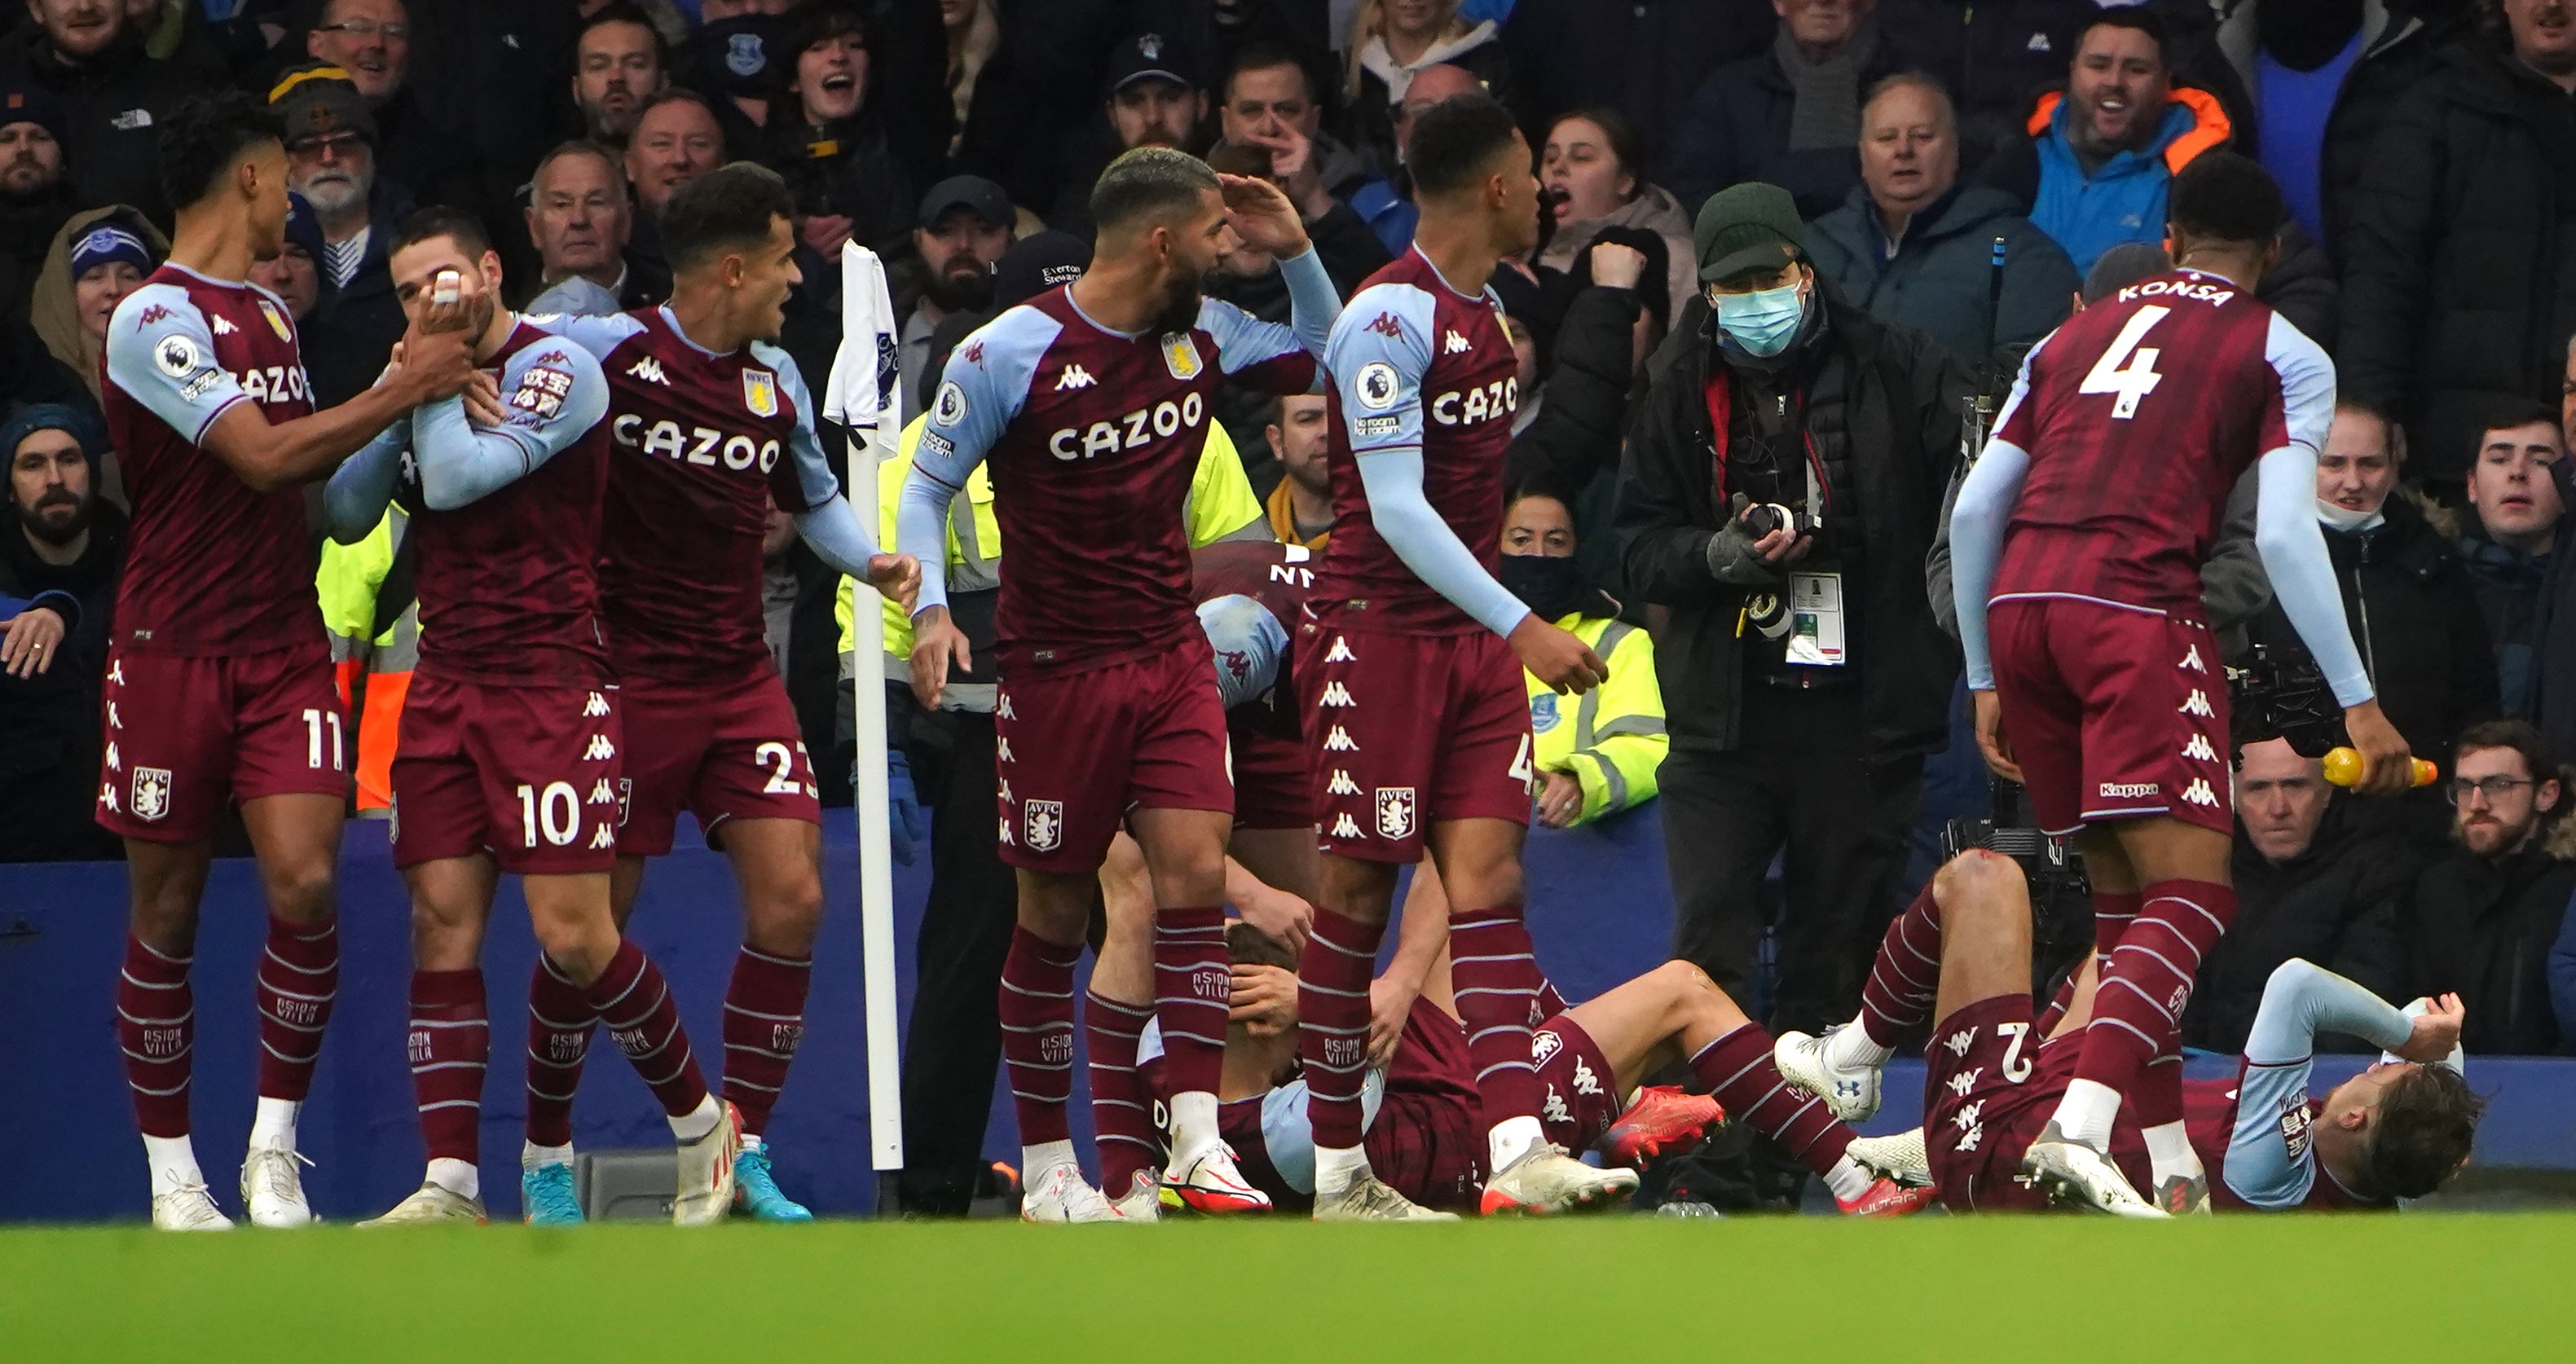 Aston Villa’s Lucas Digne and Matty Cash react to being hit by a missile at Goodison Park (Peter Byrne/PA)